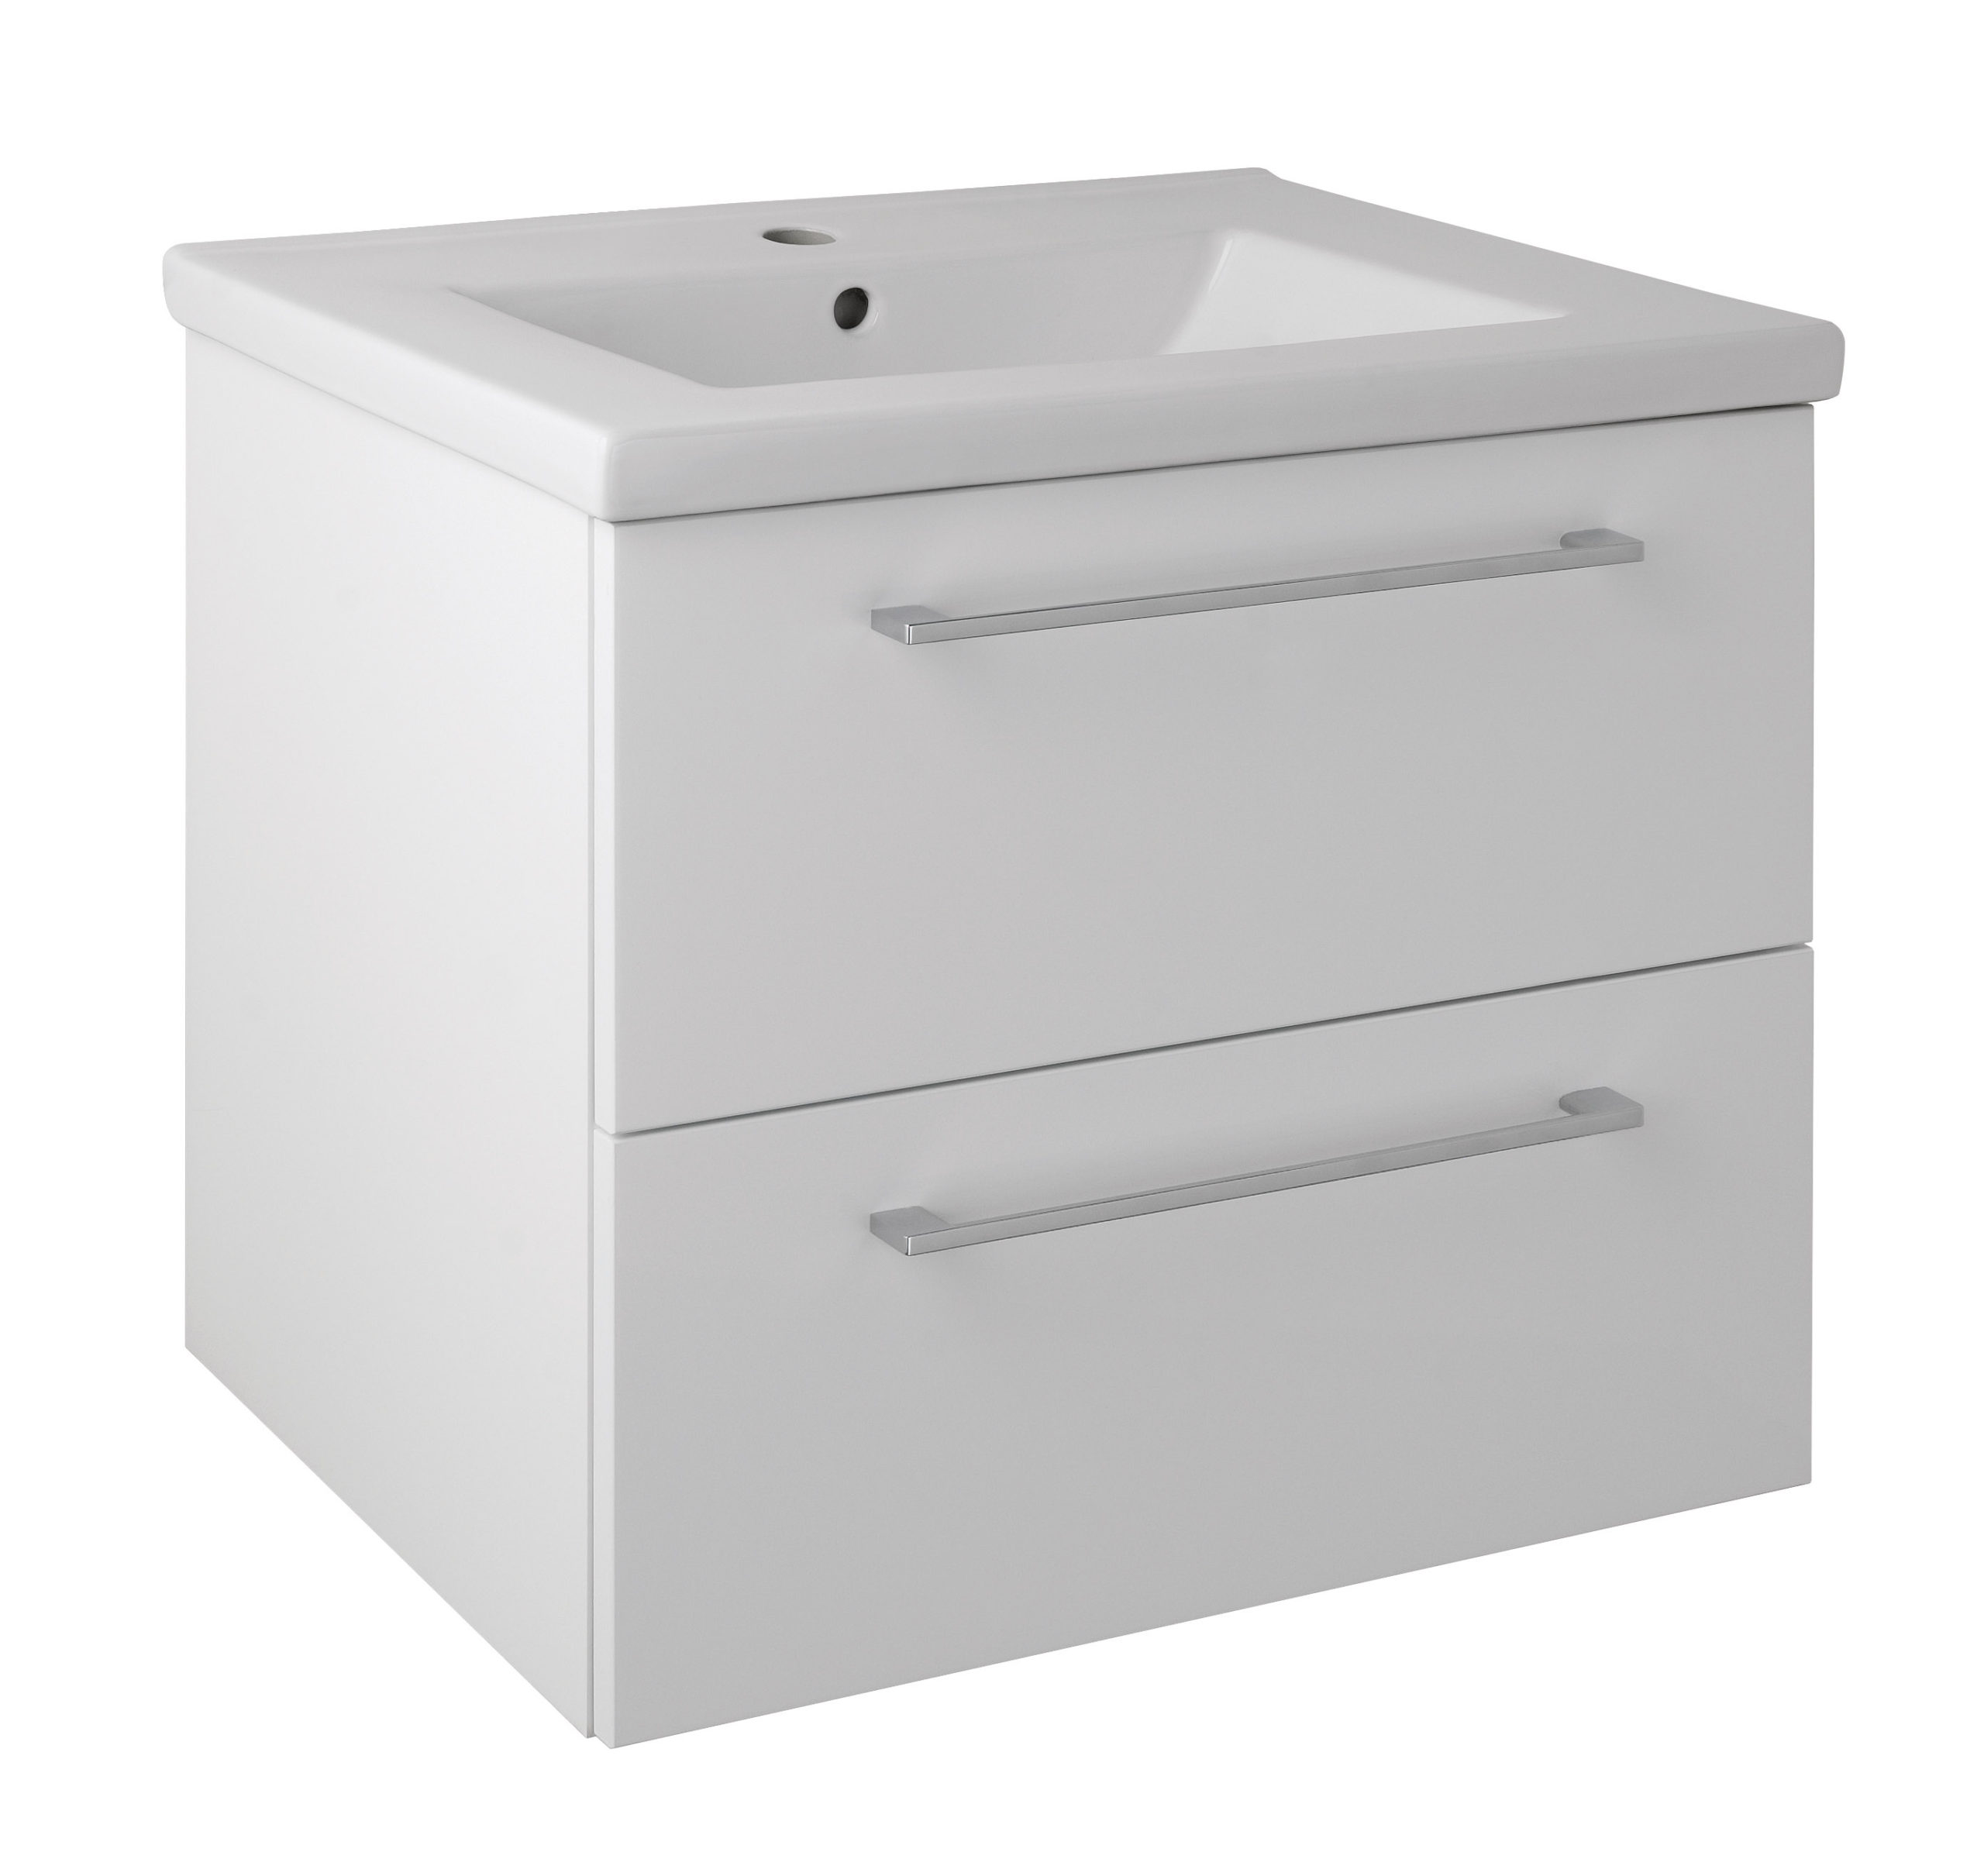 Pace 600 Wall Mounted Unit with Drawers and Basin - White - Just Taps